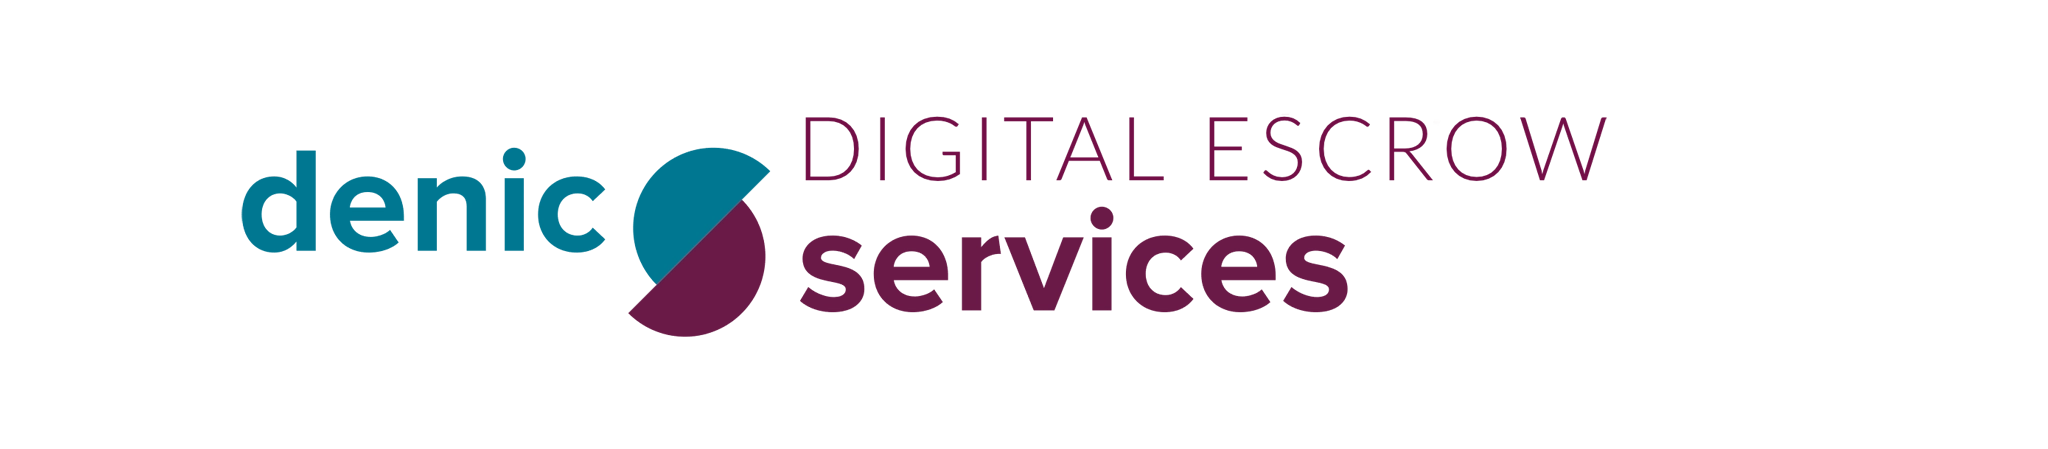 Escrow Digital by Denic Services